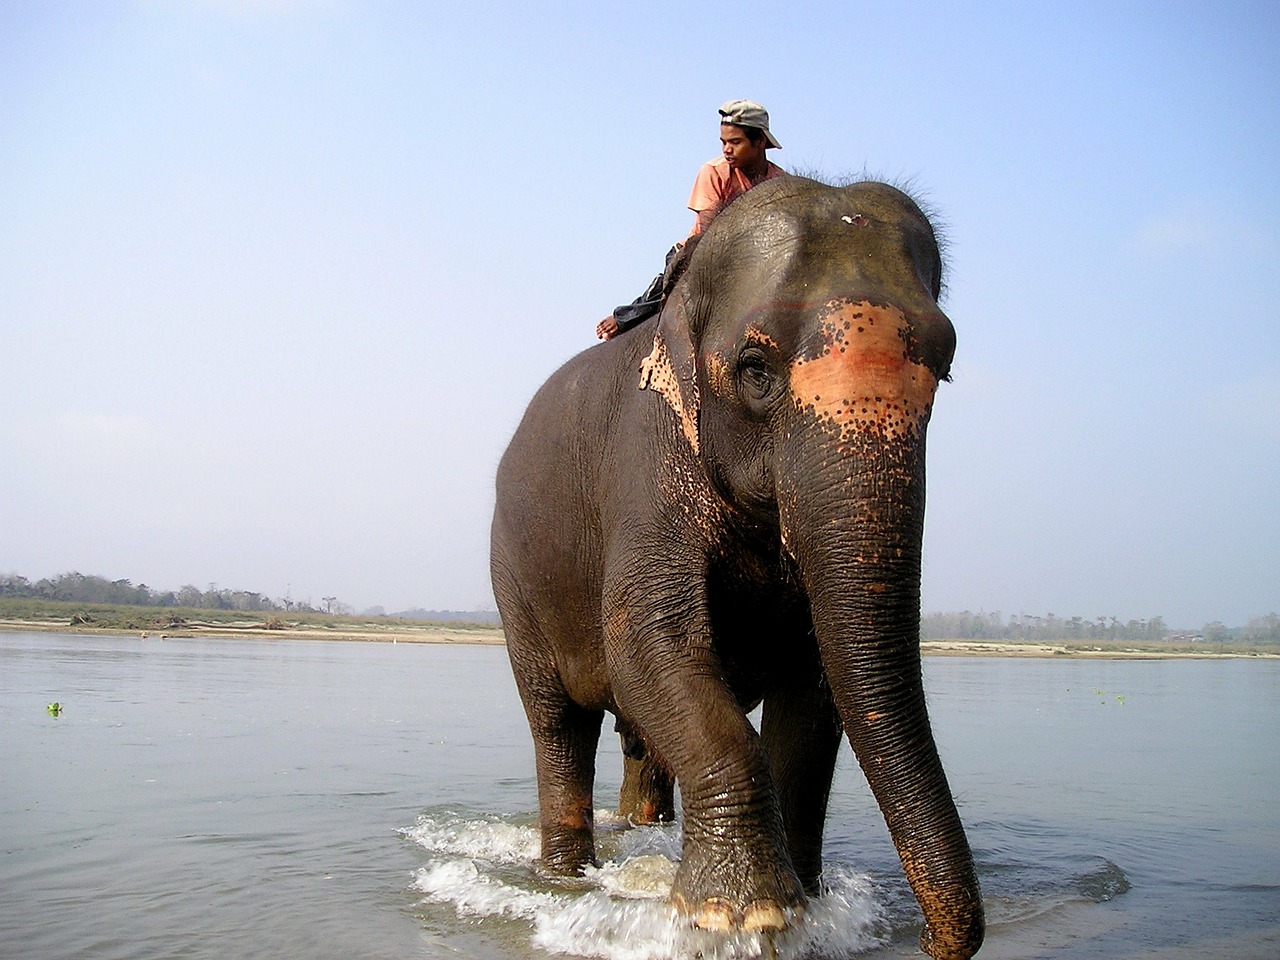 nepal,elephant,elephant driver,free pictures, free photos, free images, royalty free, free illustrations, public domain